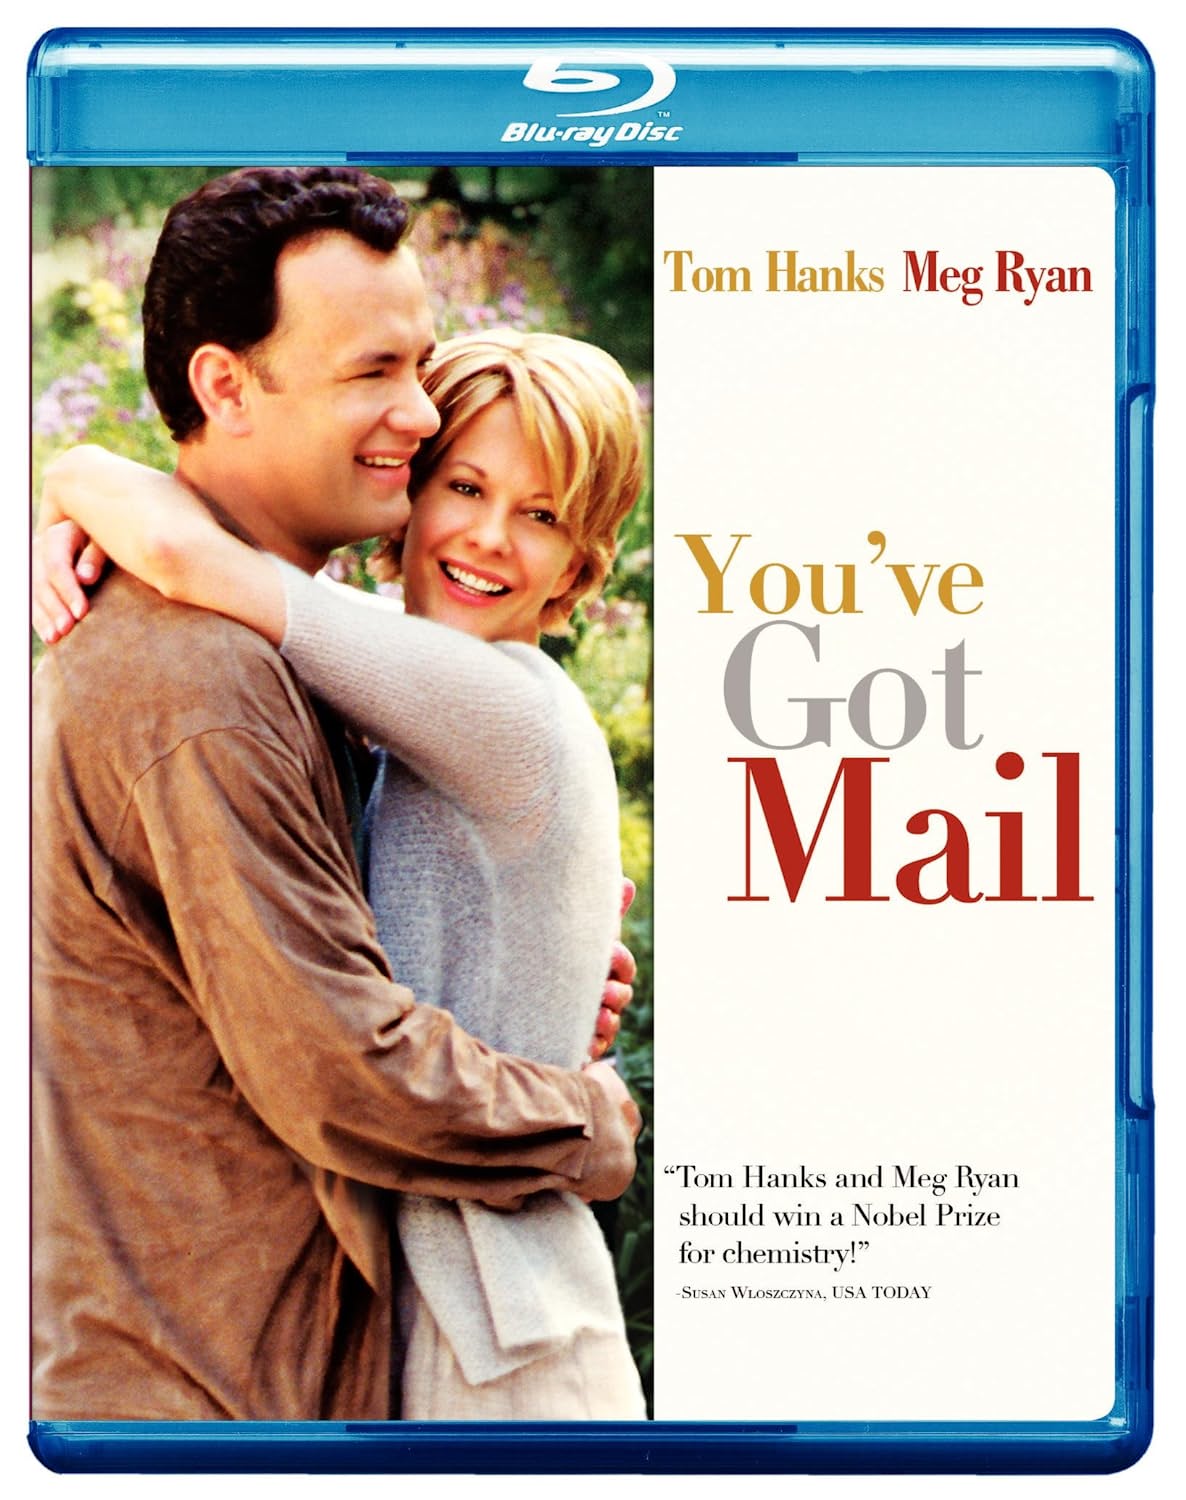 You've Got Mail - Blu-ray [ 1998 ]  - Comedy Movies On Blu-ray - Movies On GRUV